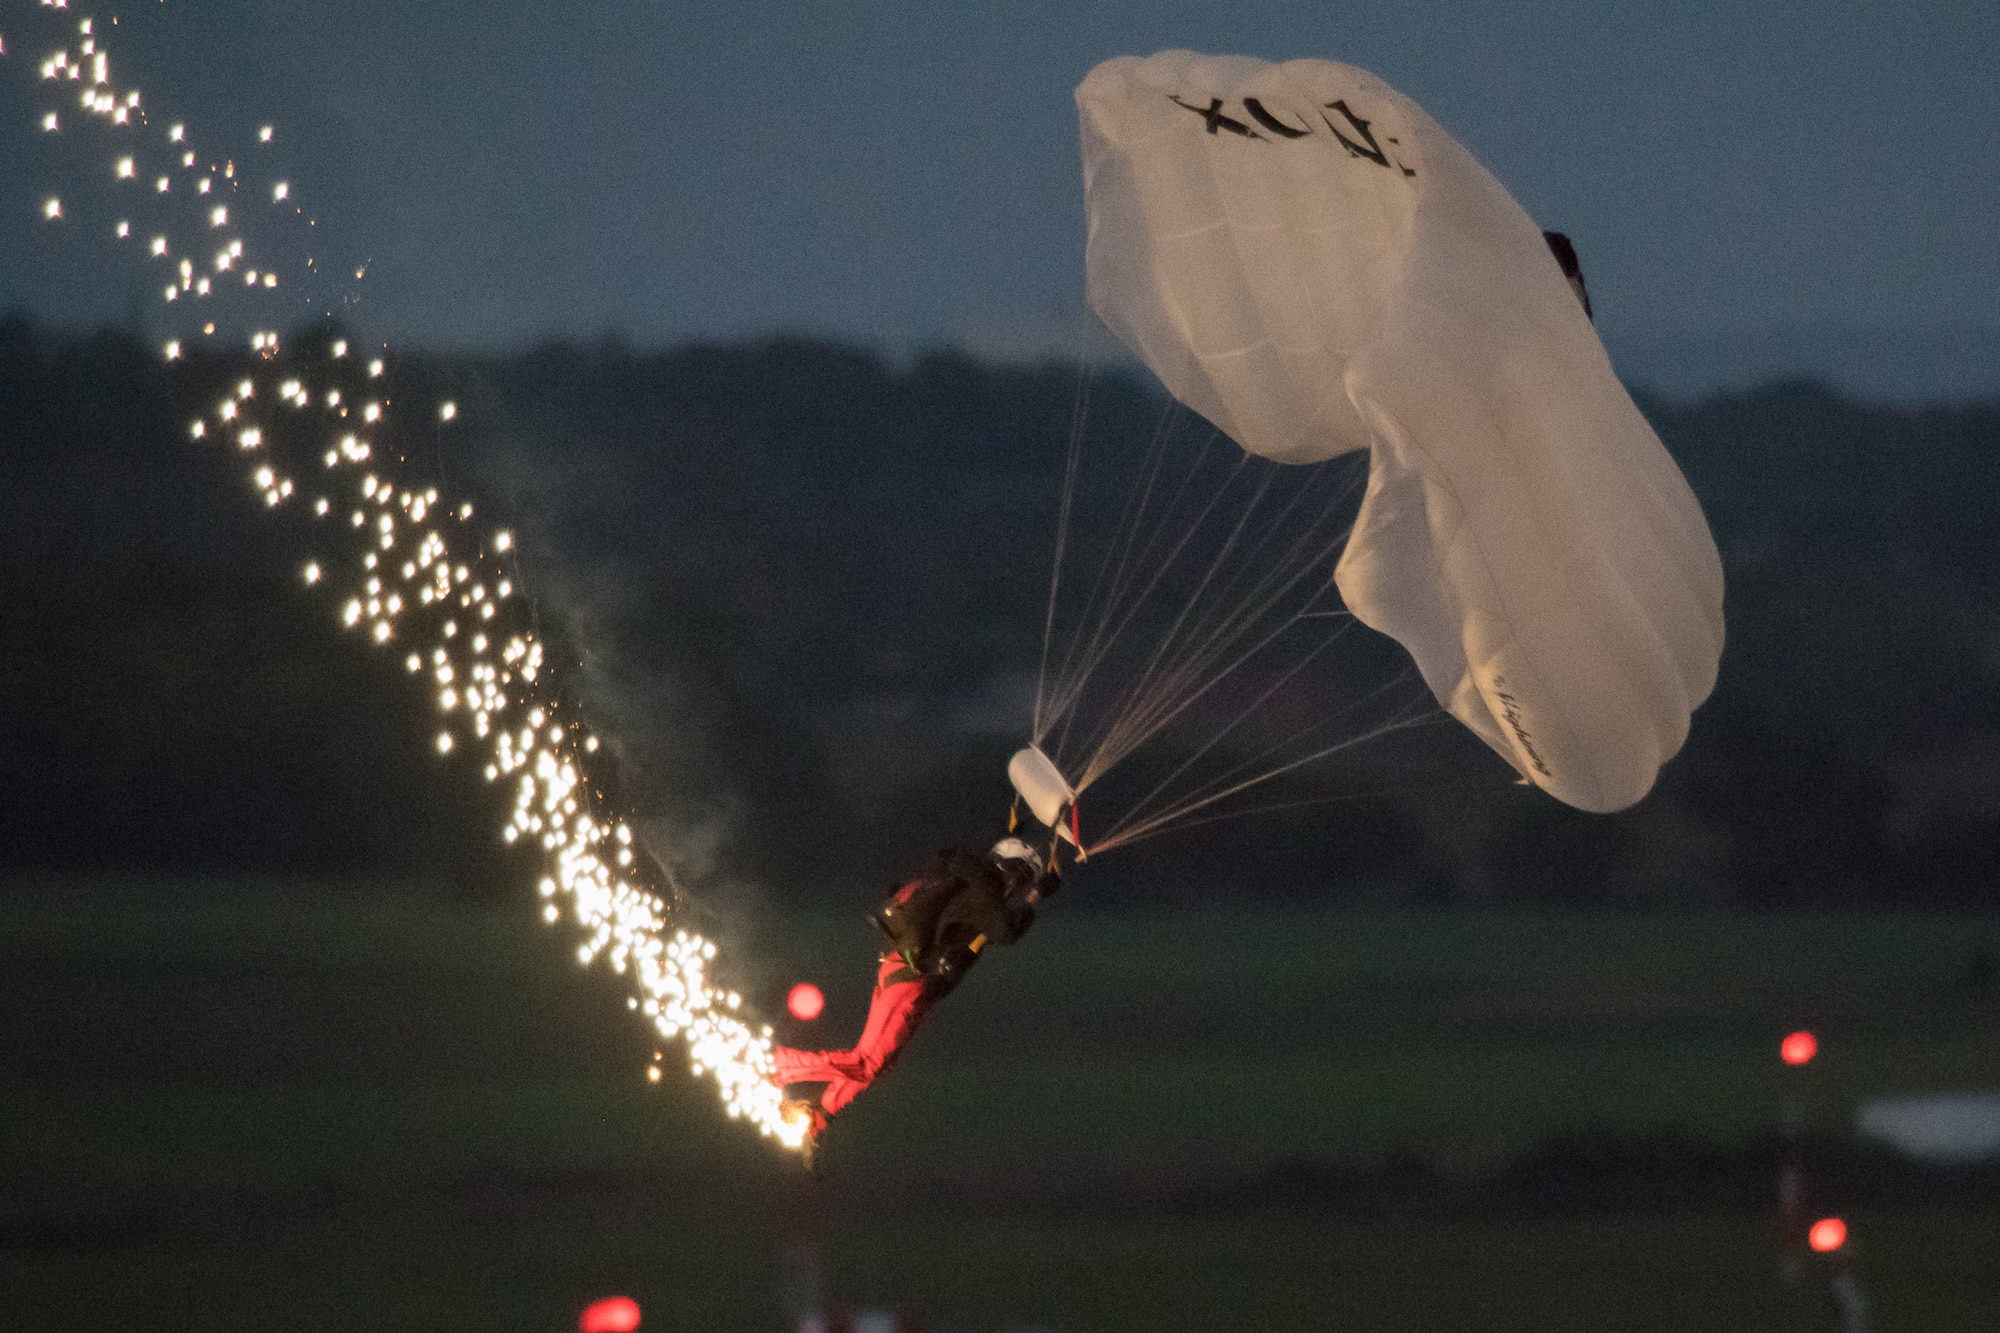 A member of the U.S. Army Special Operations Command Black Daggers Parachute Demonstration Team lands after a twilight jump at the 2019 Thunder Over Dover Air Show, Sept. 13, 2019, at Dover Air Force Base, Del. The team performed several jumps during the event to demonstrate various skills. (U.S. Air Force photo by Mauricio Campino)